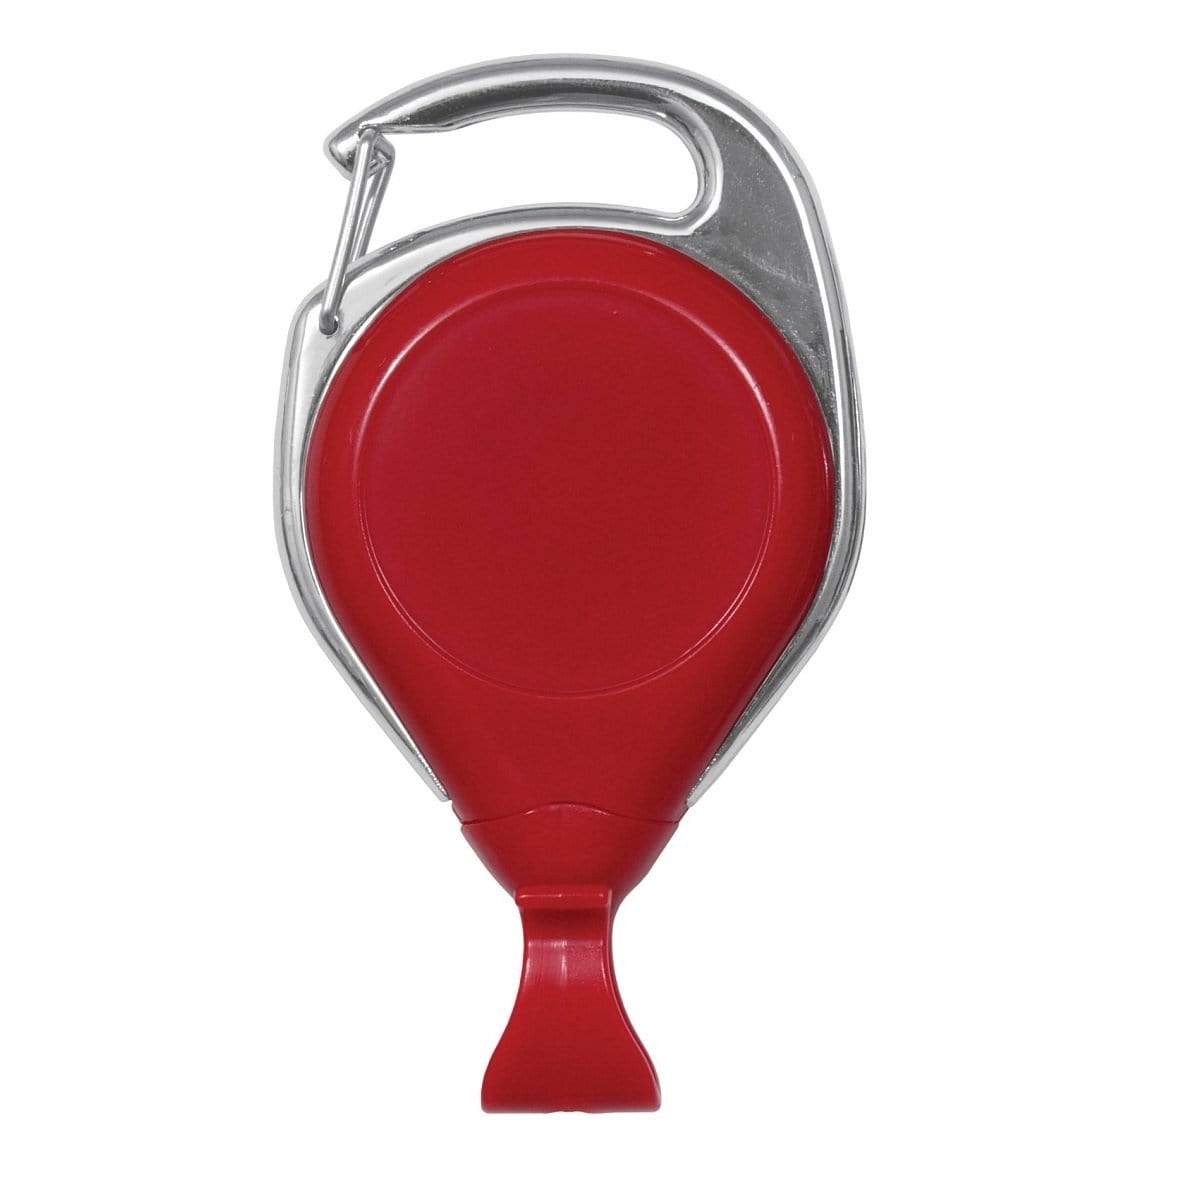 Red and silver Proreel Carabiner Badge Reel with Belt Clip (P/N 2120-706X) with a round center, a small attached tool at the bottom, and a handy Proreel belt clip.